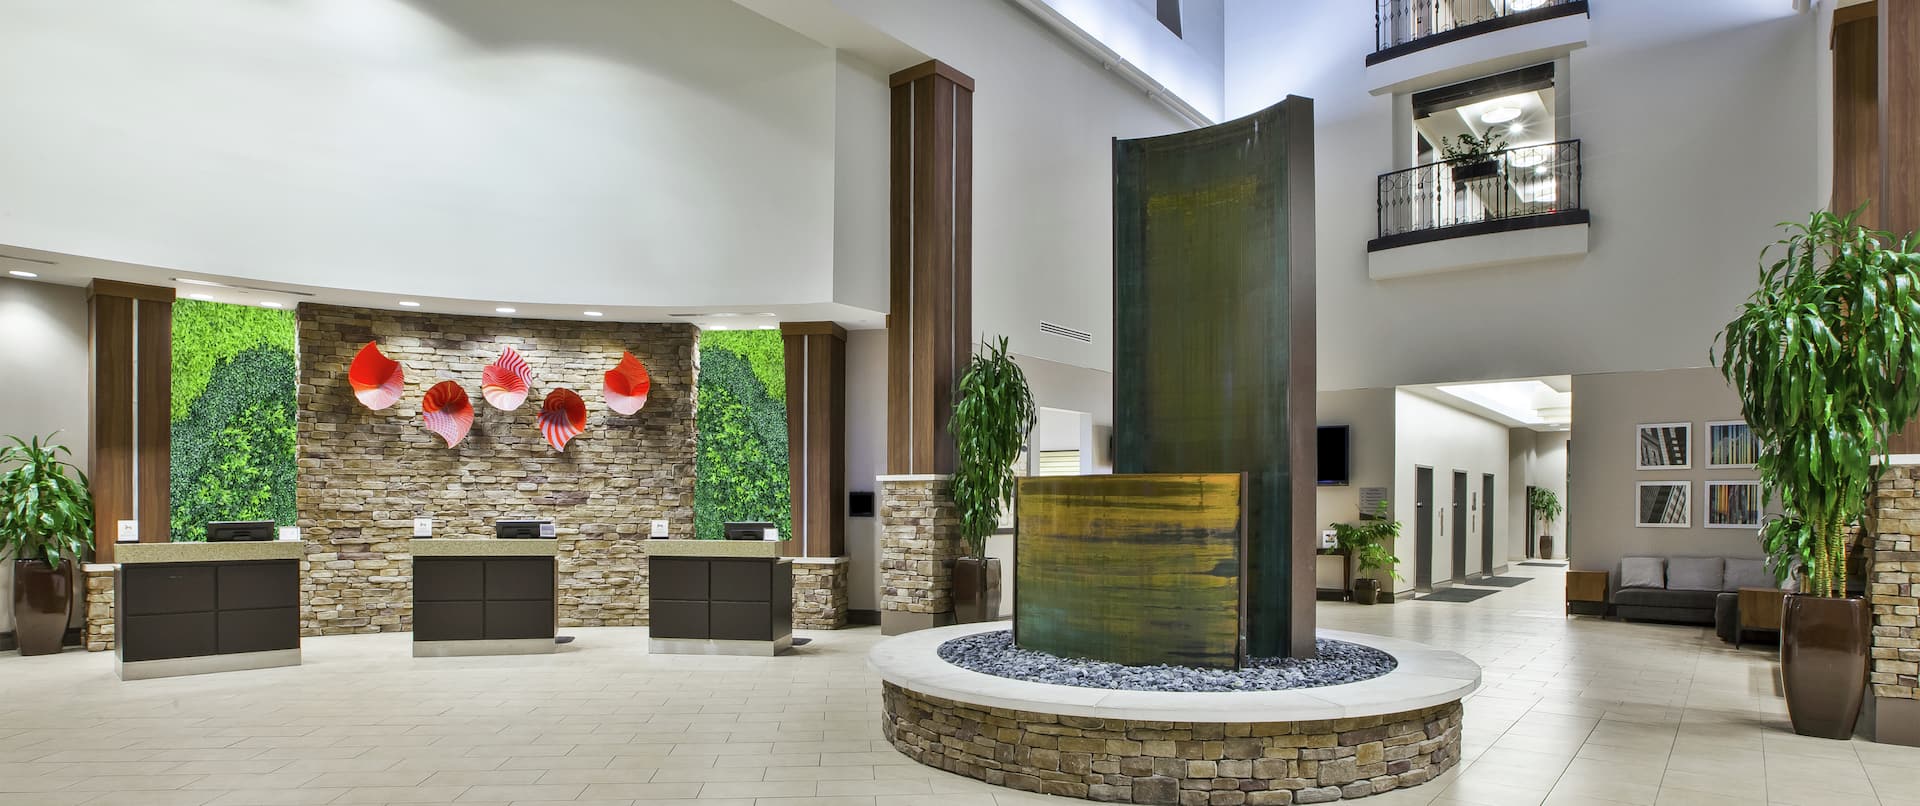 Reception Area and Fountain in  Lobby Entrance